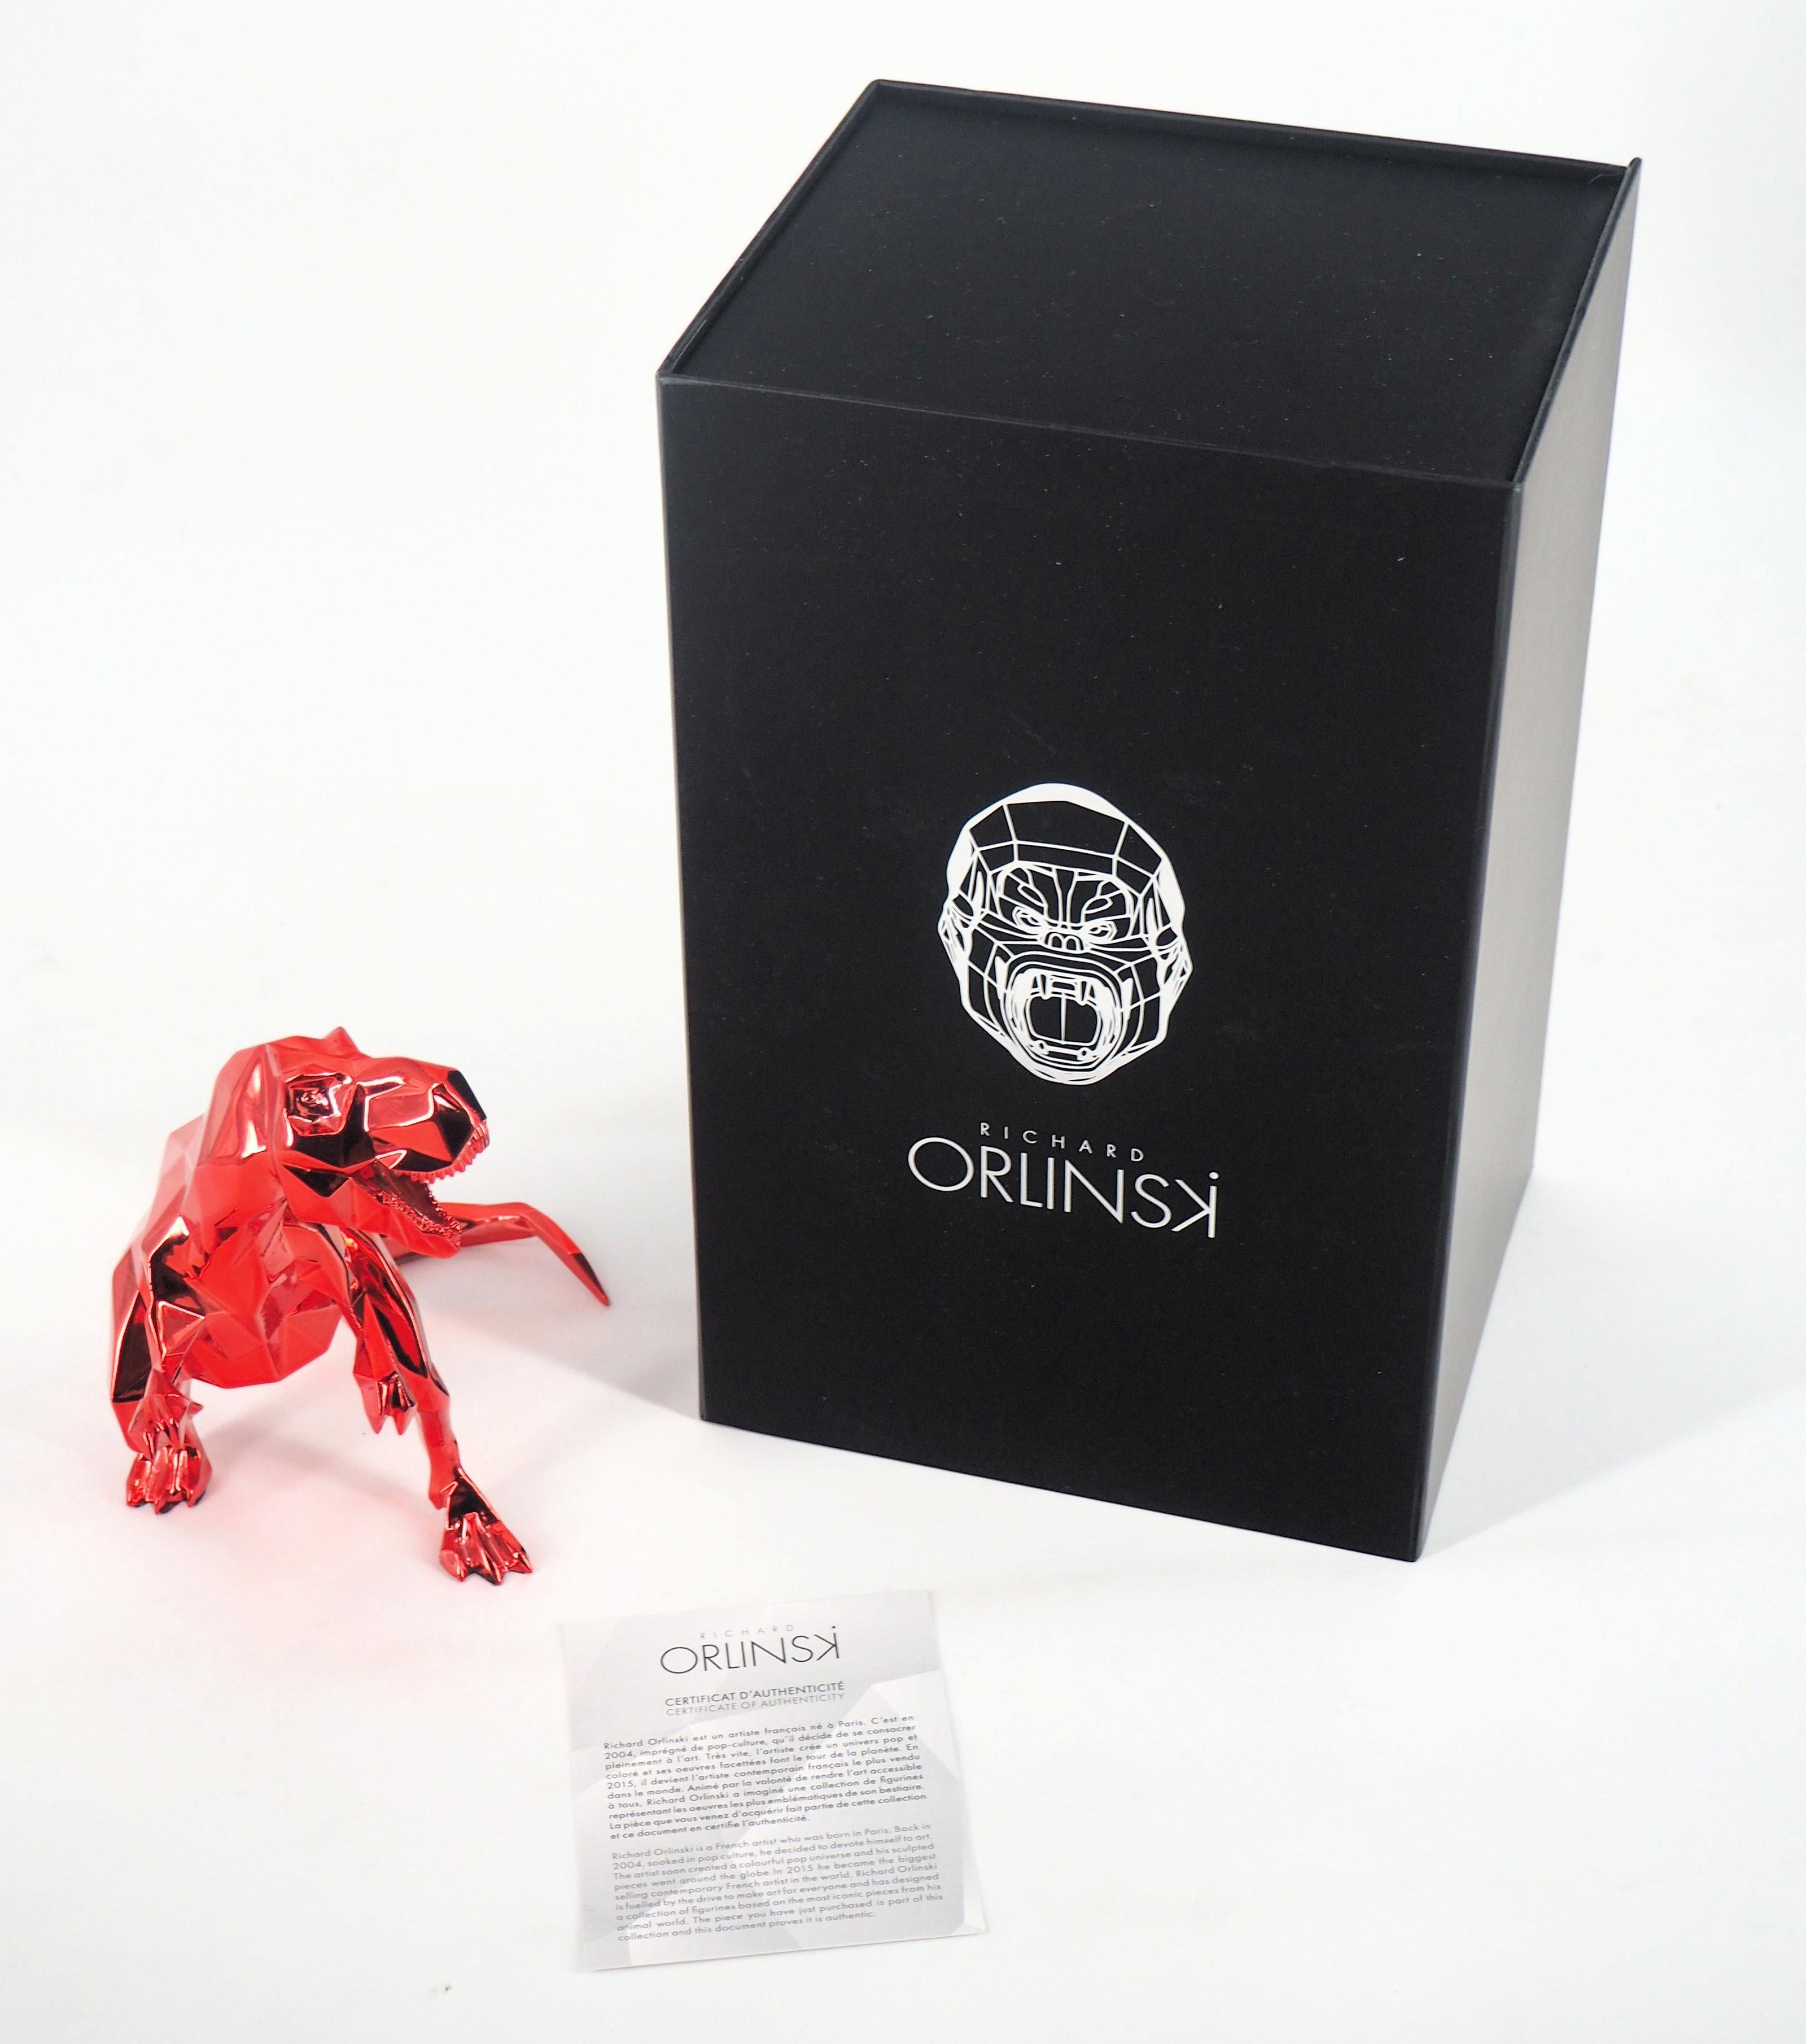 Richard ORLINSKI
T-Rex Spirit (Red Edition)

Sculpture in resin
Metallic Red
About 14.5 x 10 cm (c. 5.5 x 4 in)
Presented in original box with certificate

Excellent condition